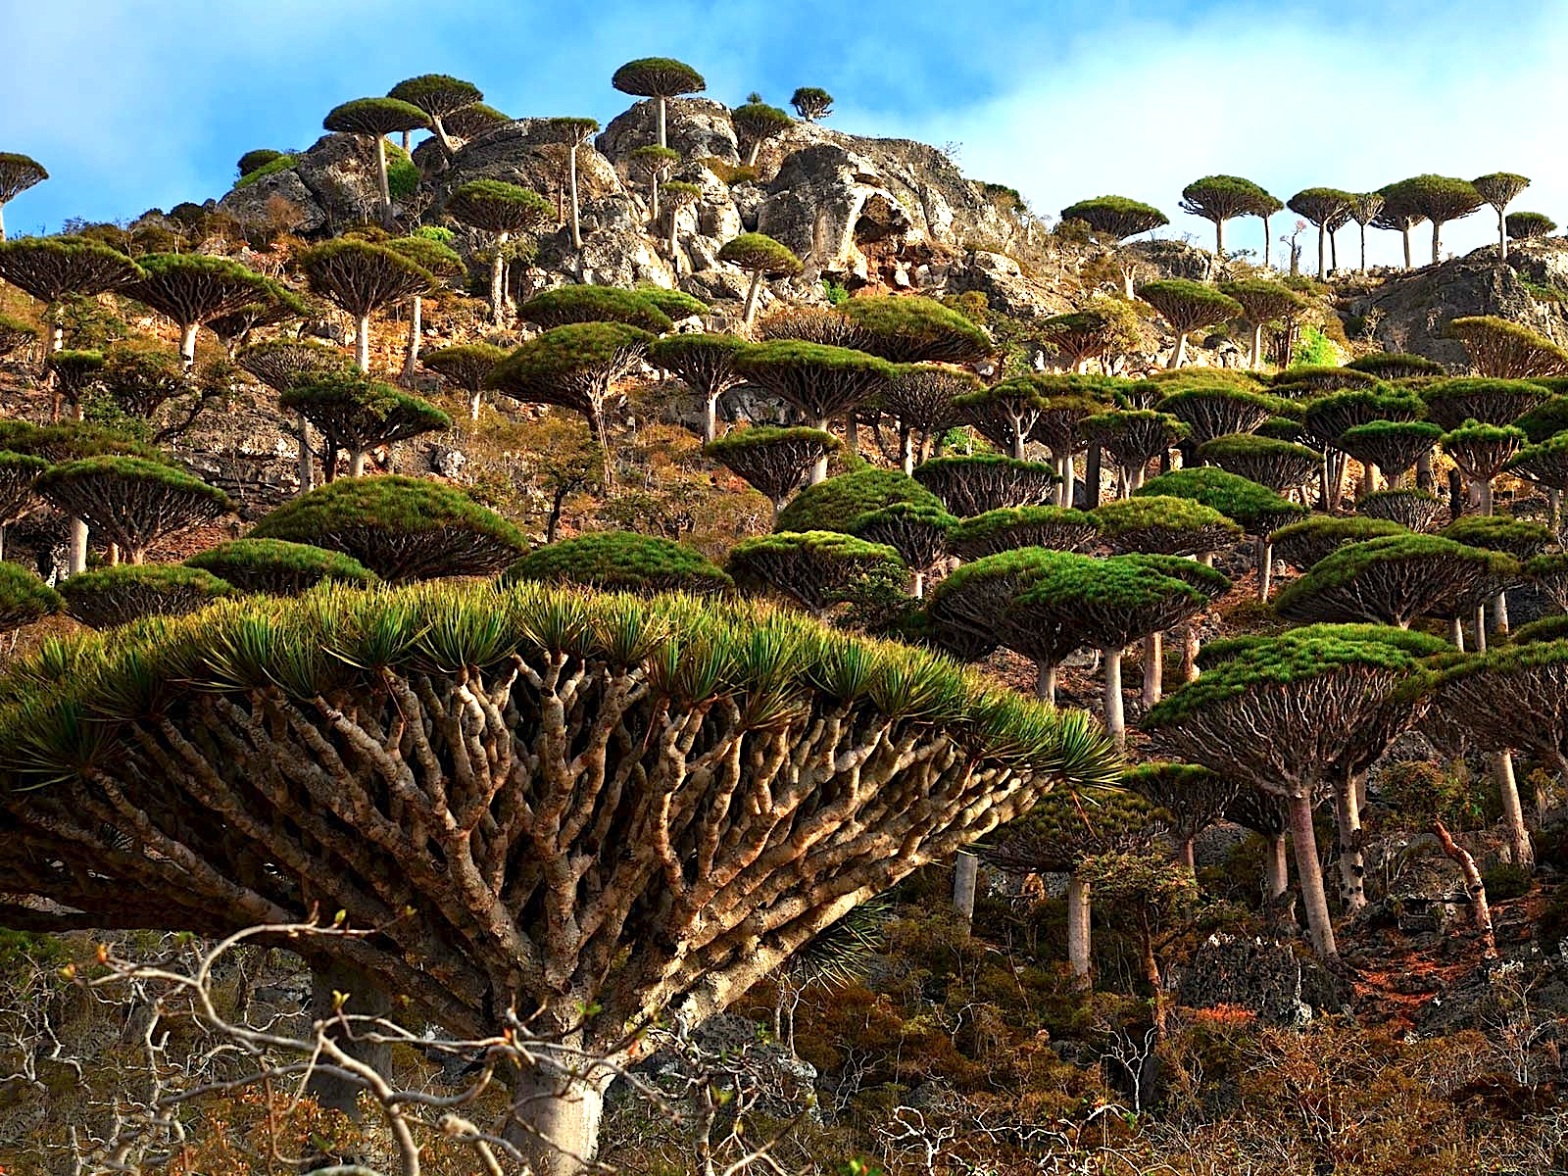 Welcome to a strange and forgotten alien world: Socotra